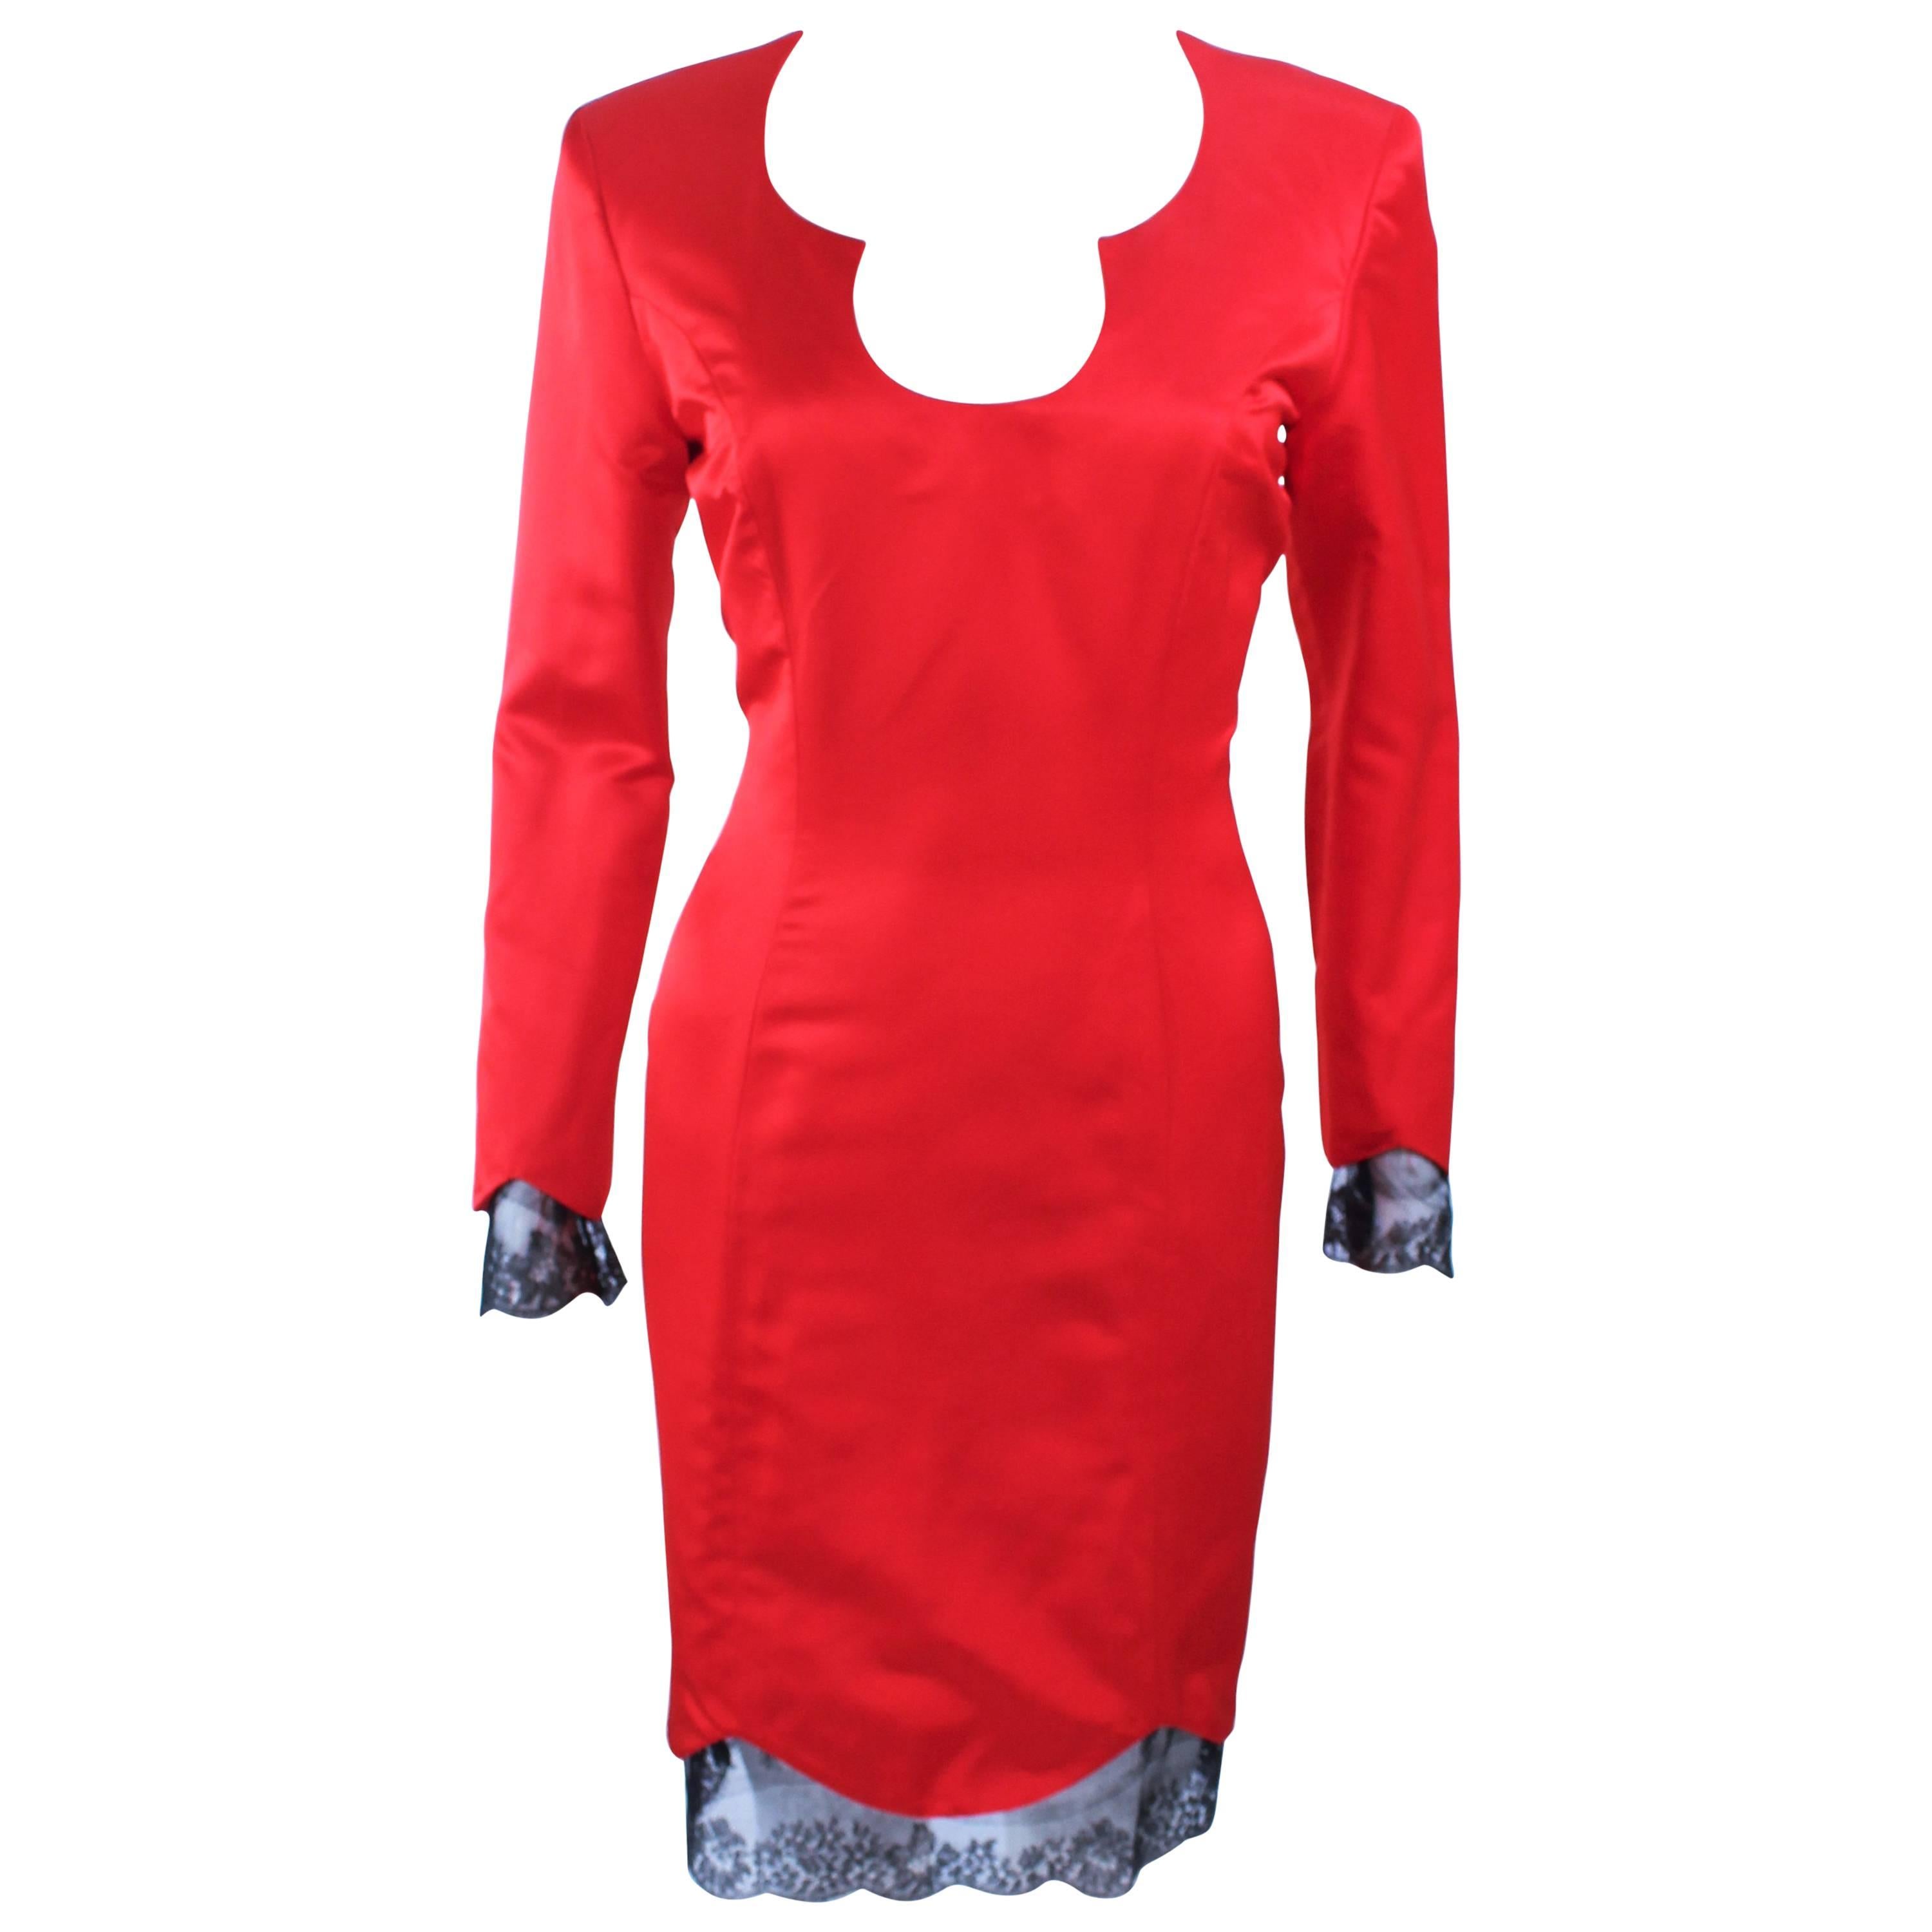 TED HEYMAN Red Silk Cocktail Dress with Lace Trim Size 8 For Sale